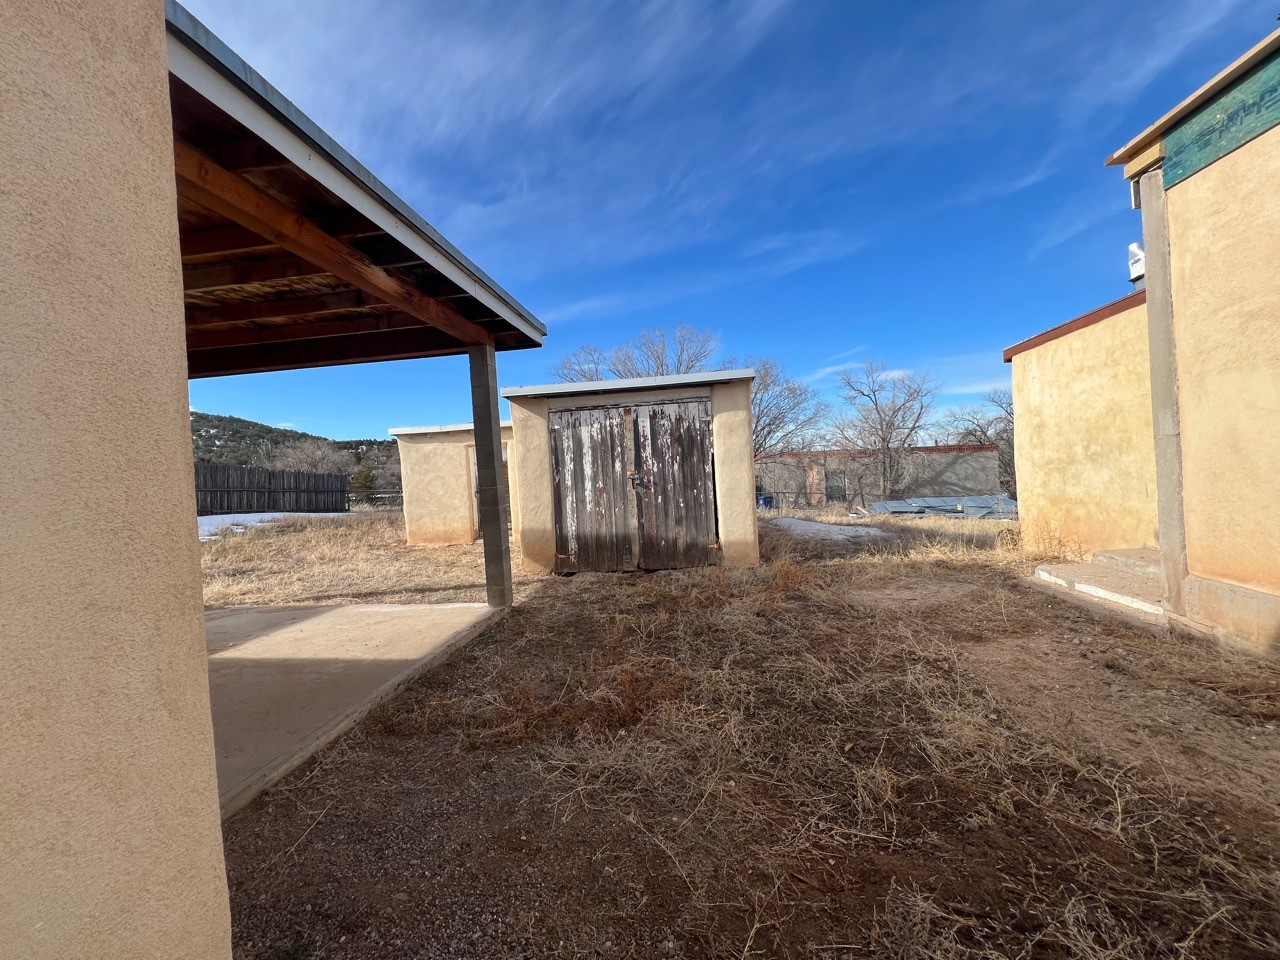 406 Apodaca Hill Street, Santa Fe, New Mexico 87501, 3 Bedrooms Bedrooms, ,1 BathroomBathrooms,Residential,For Sale,406 Apodaca Hill Street,202400405